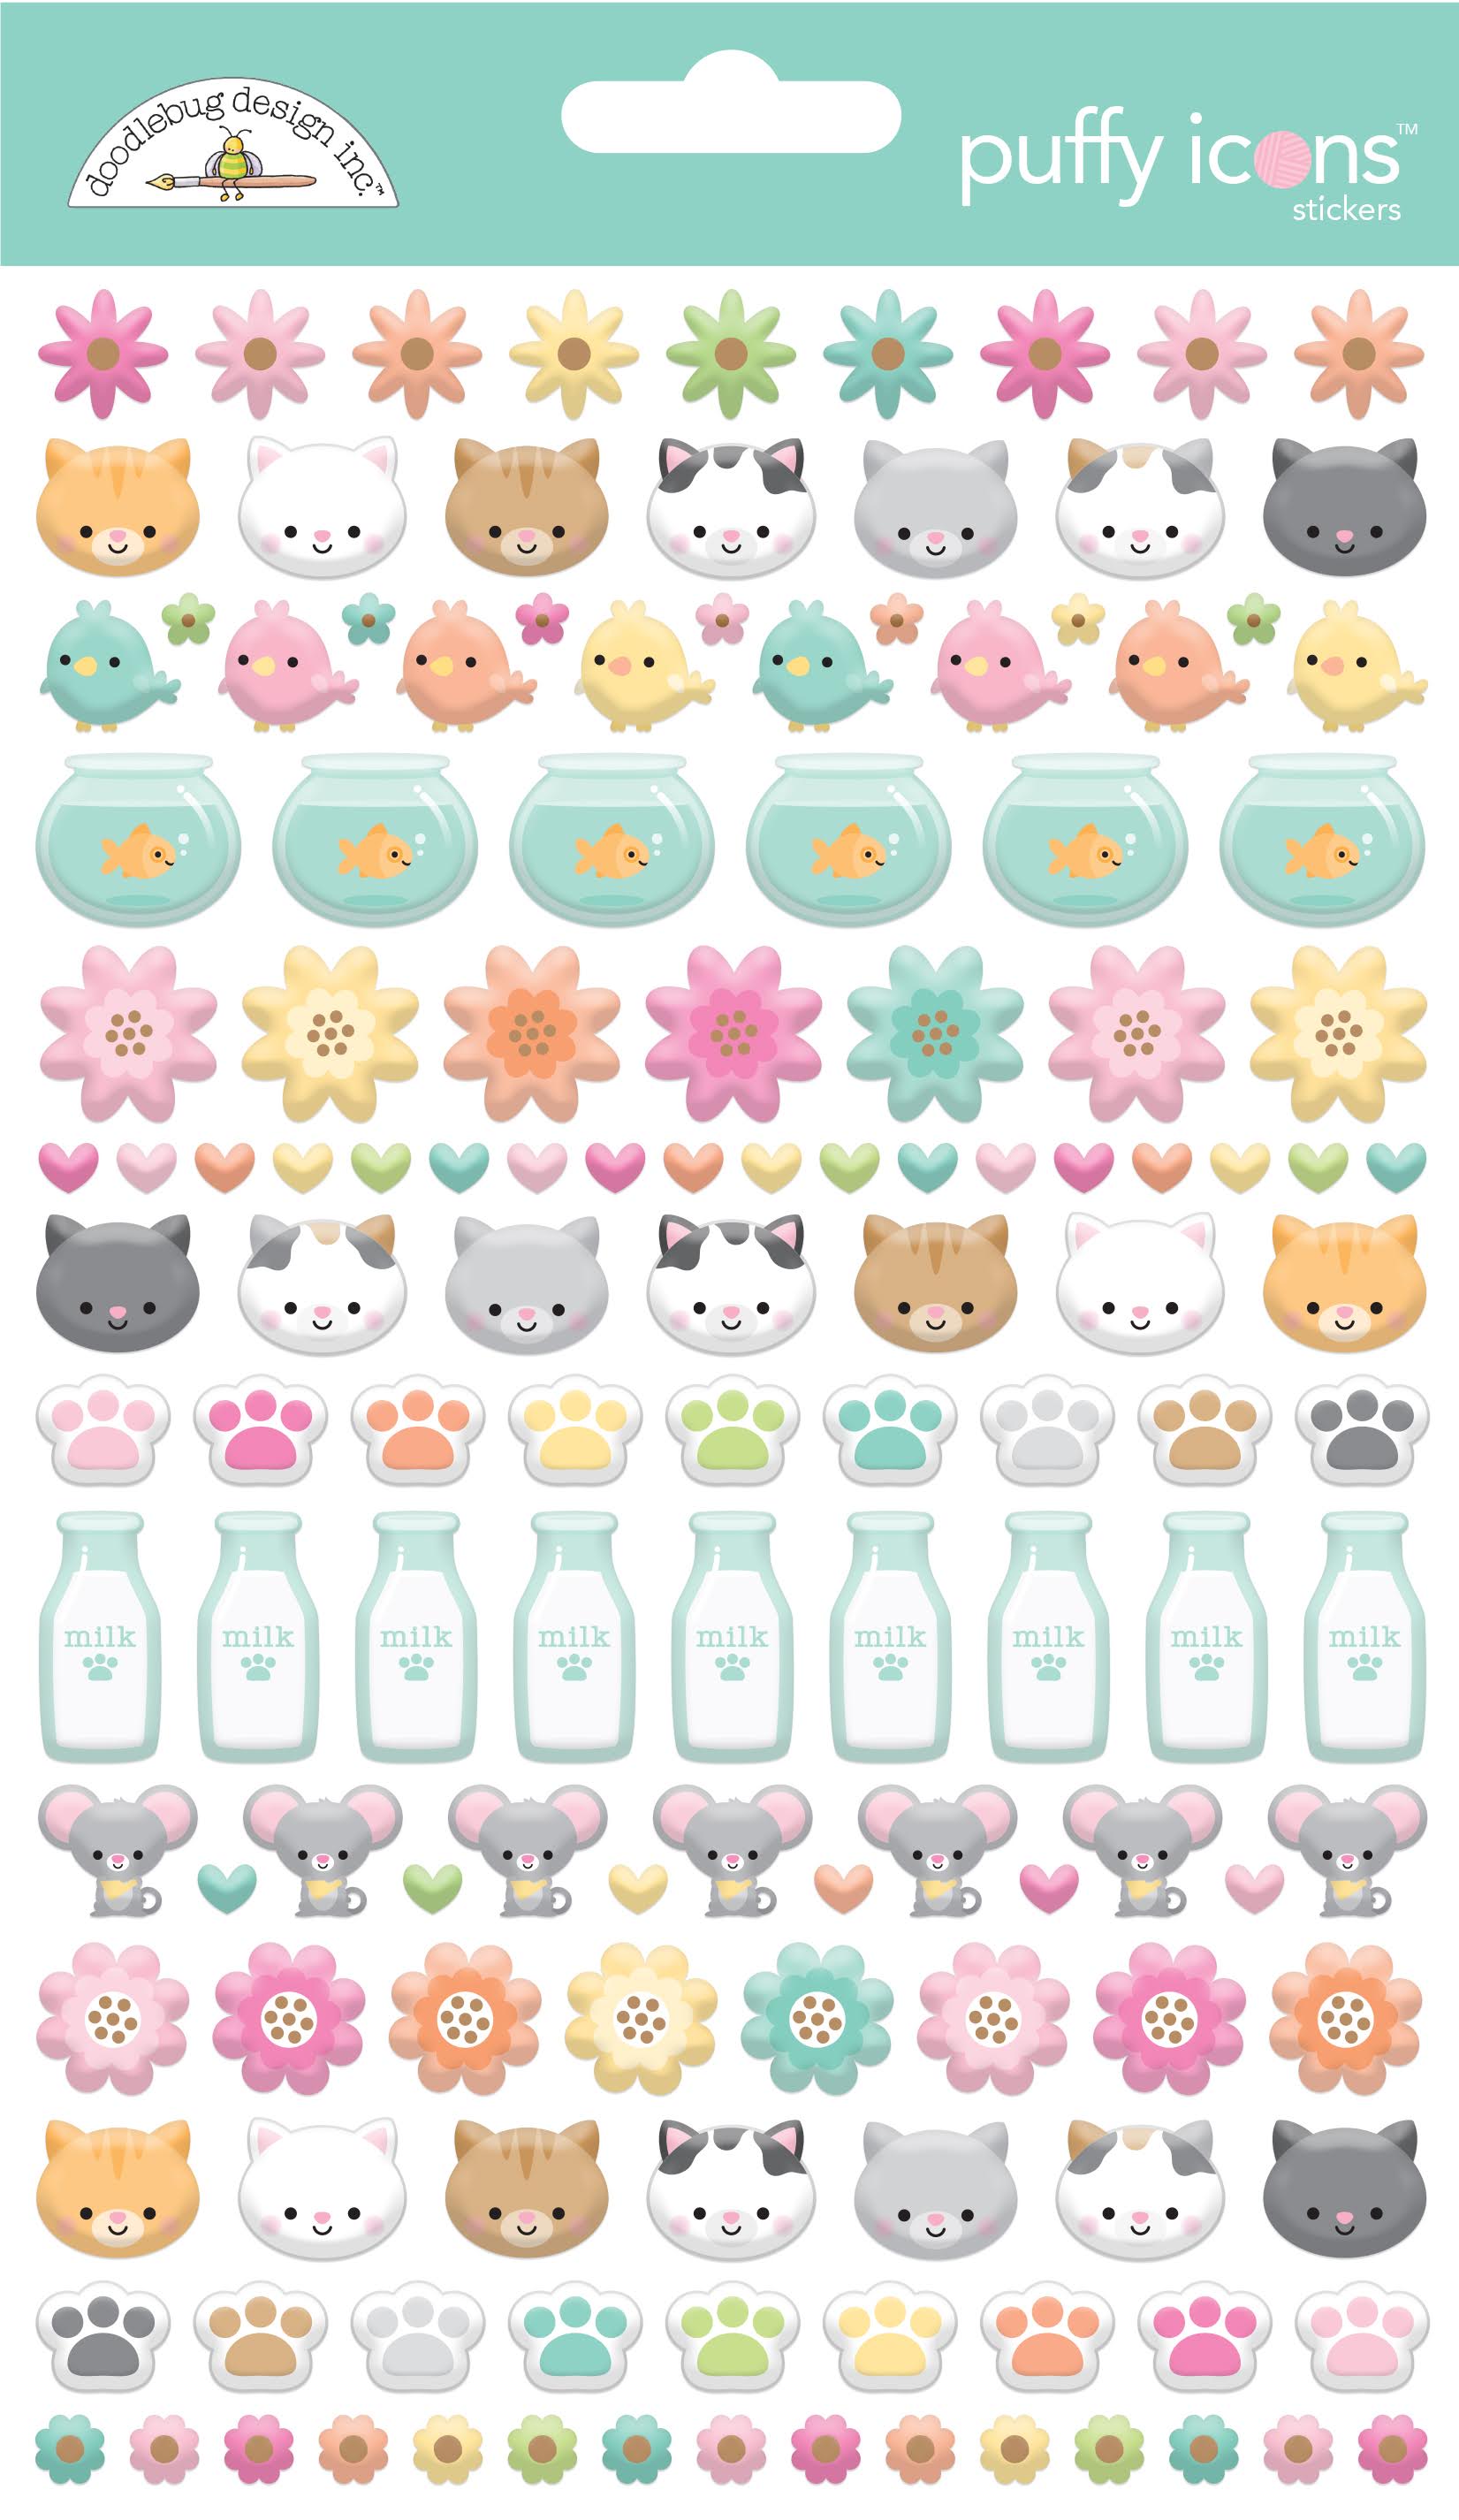 Doodlebug Pretty Kitty Puffy Icons Stickers